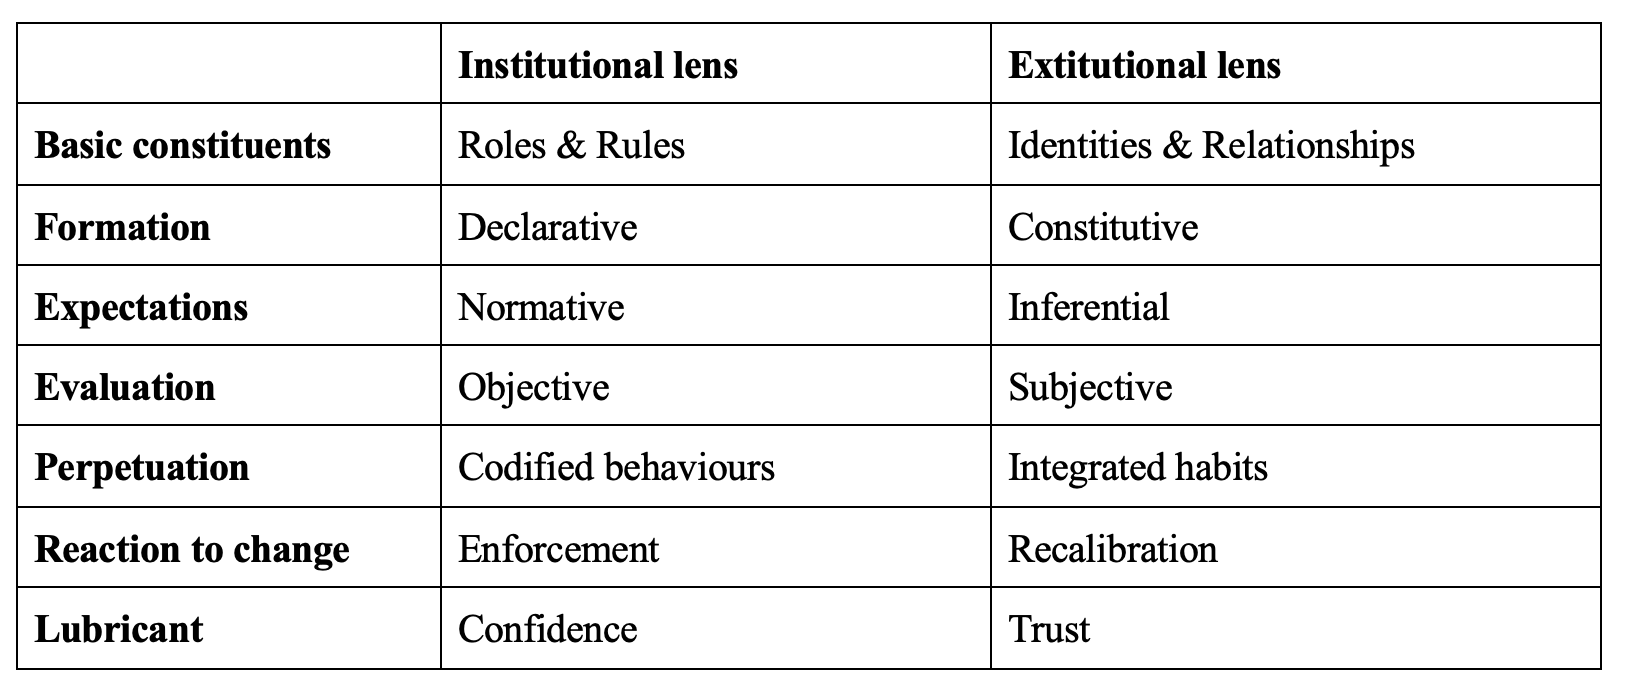 Table with the characteristics of institutional and extitutional lenses